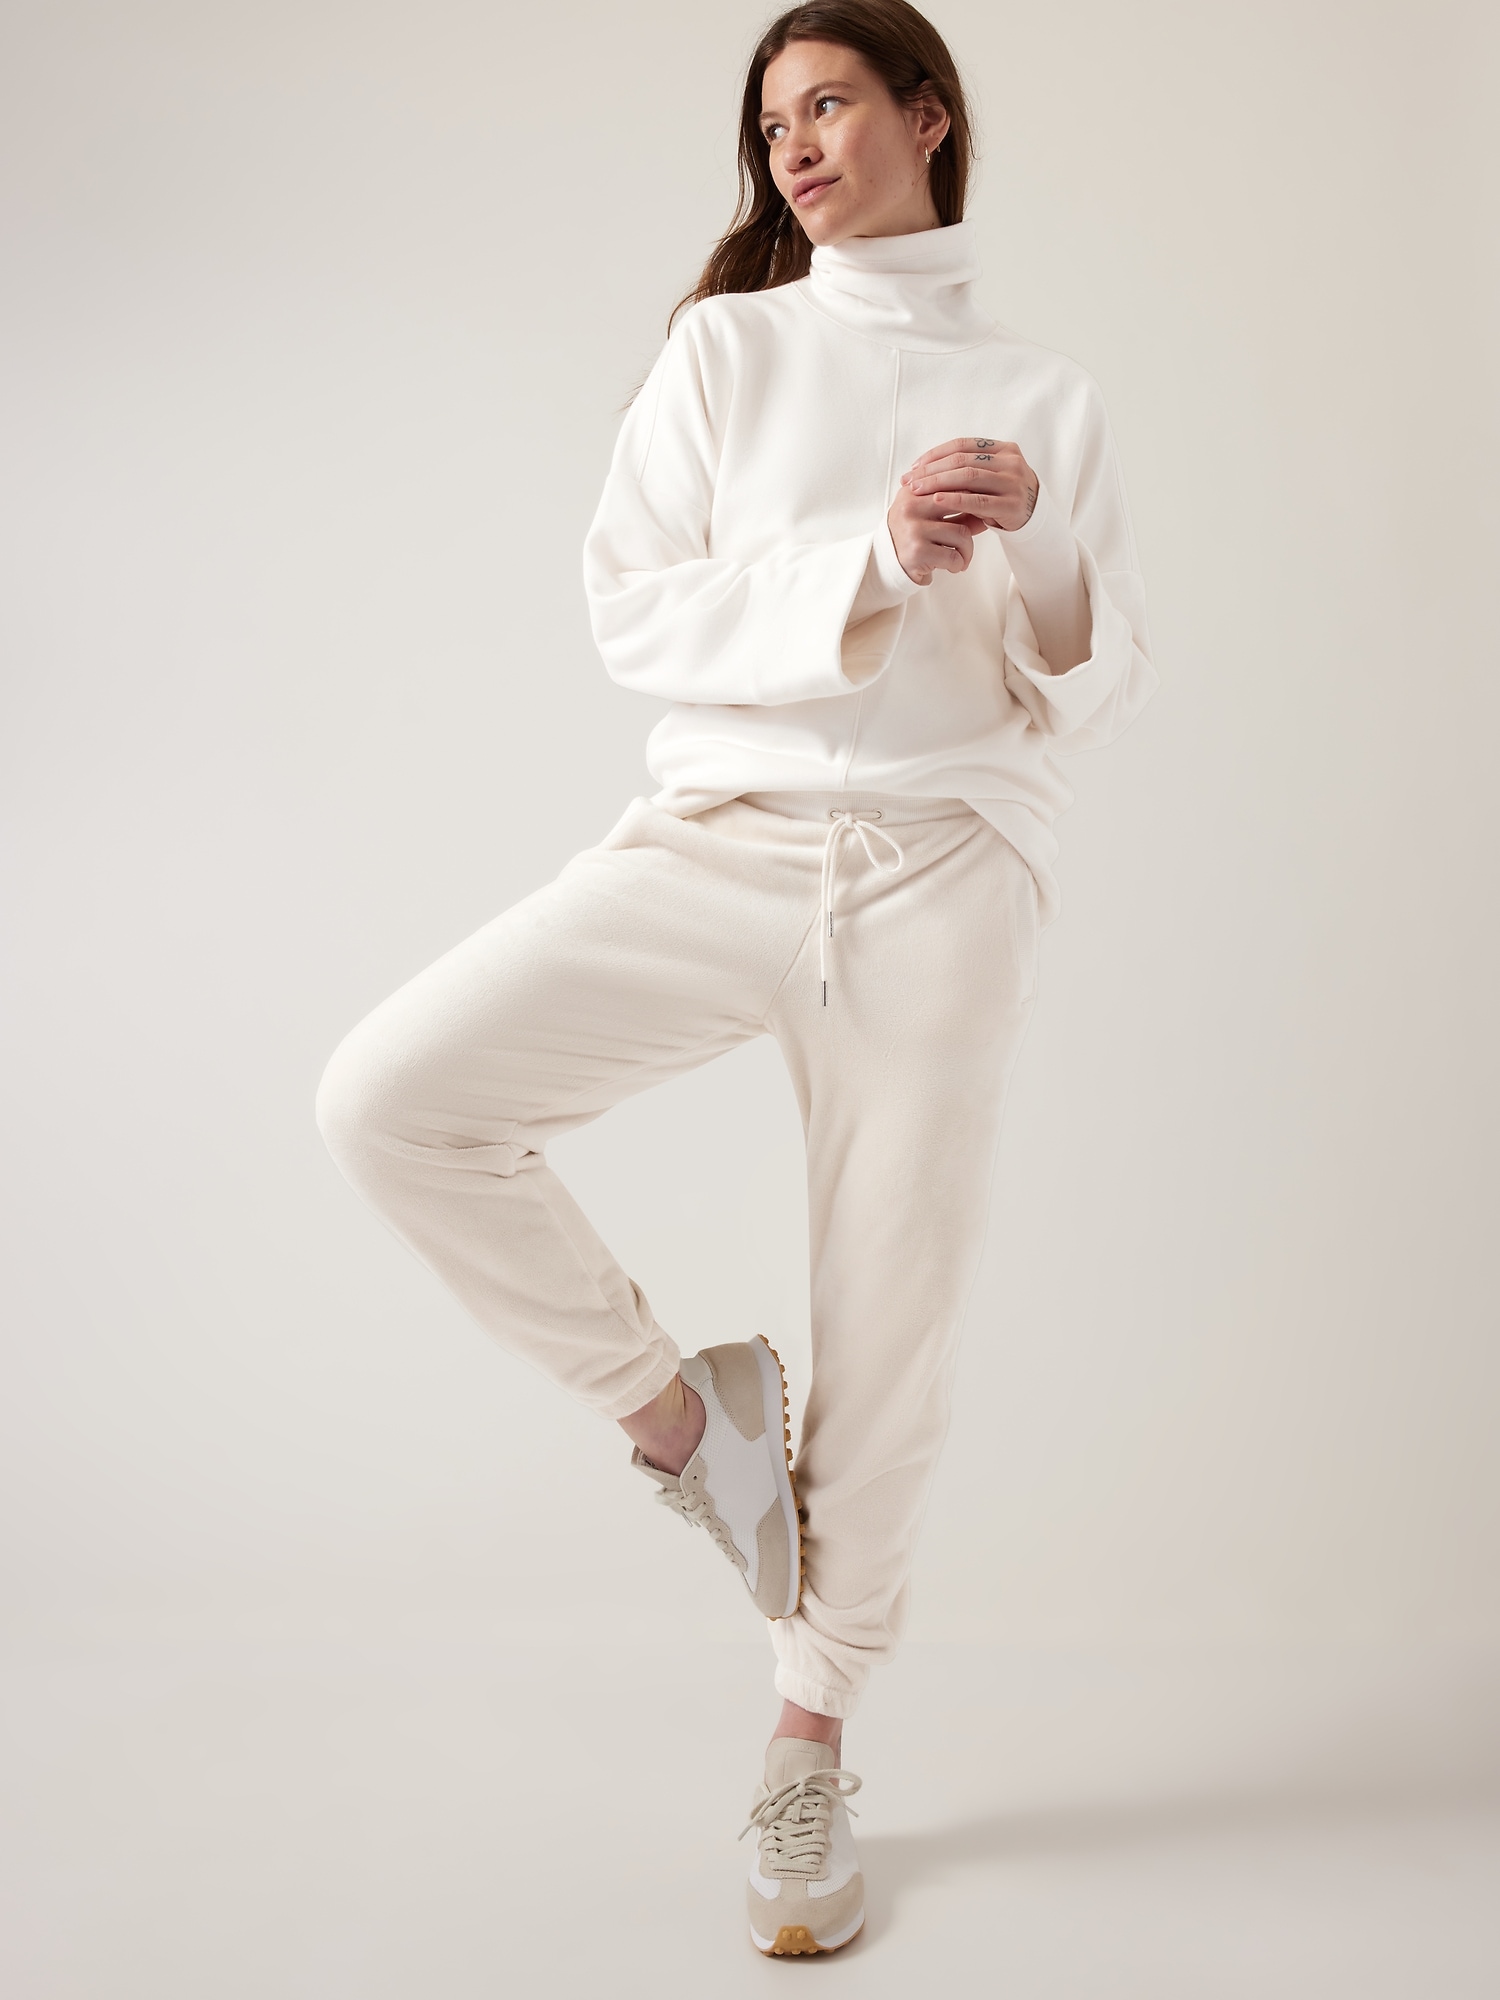 White cozy joggers for lounging